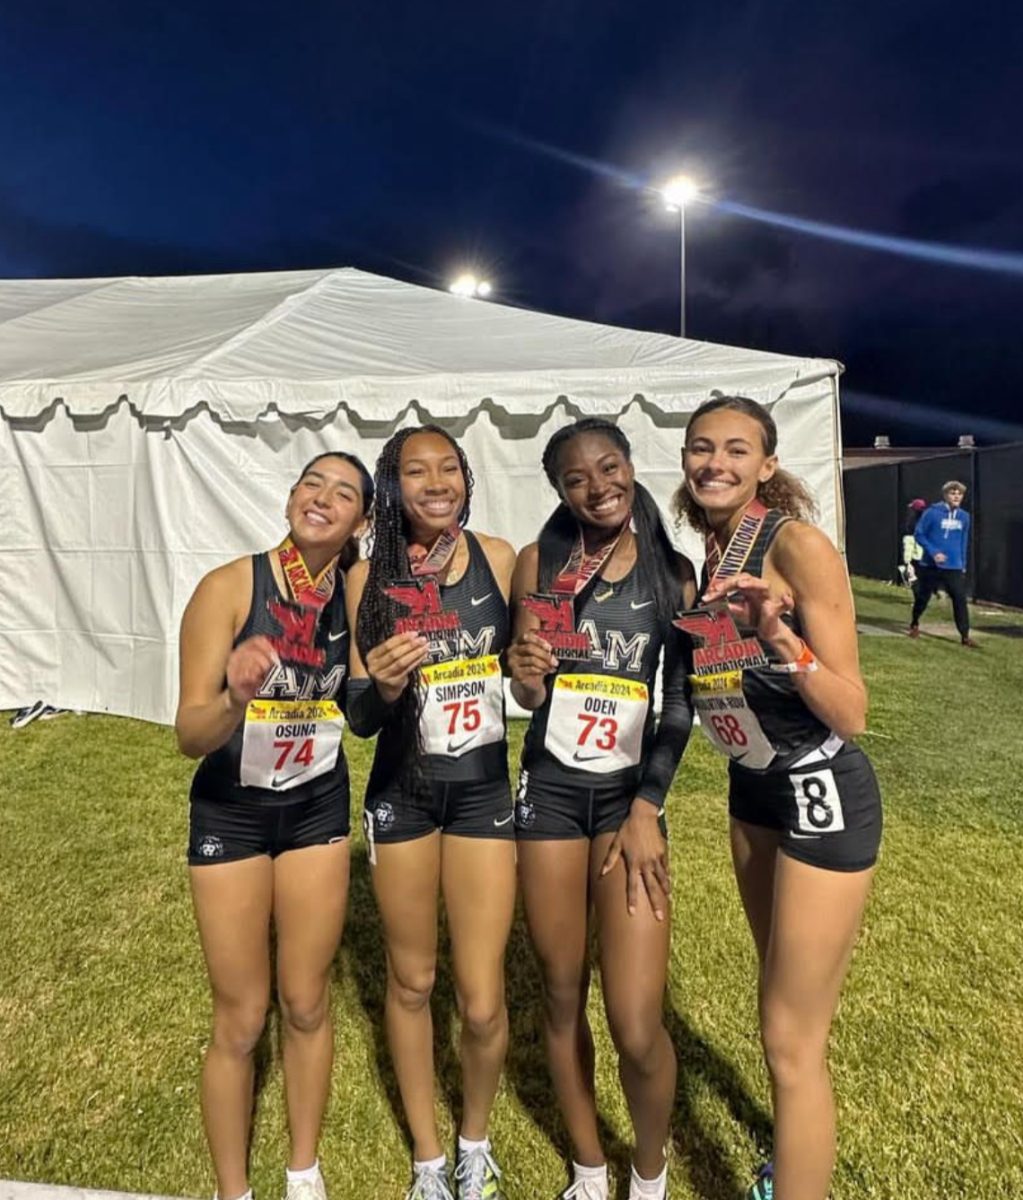 Track and Field: A Winning Culture